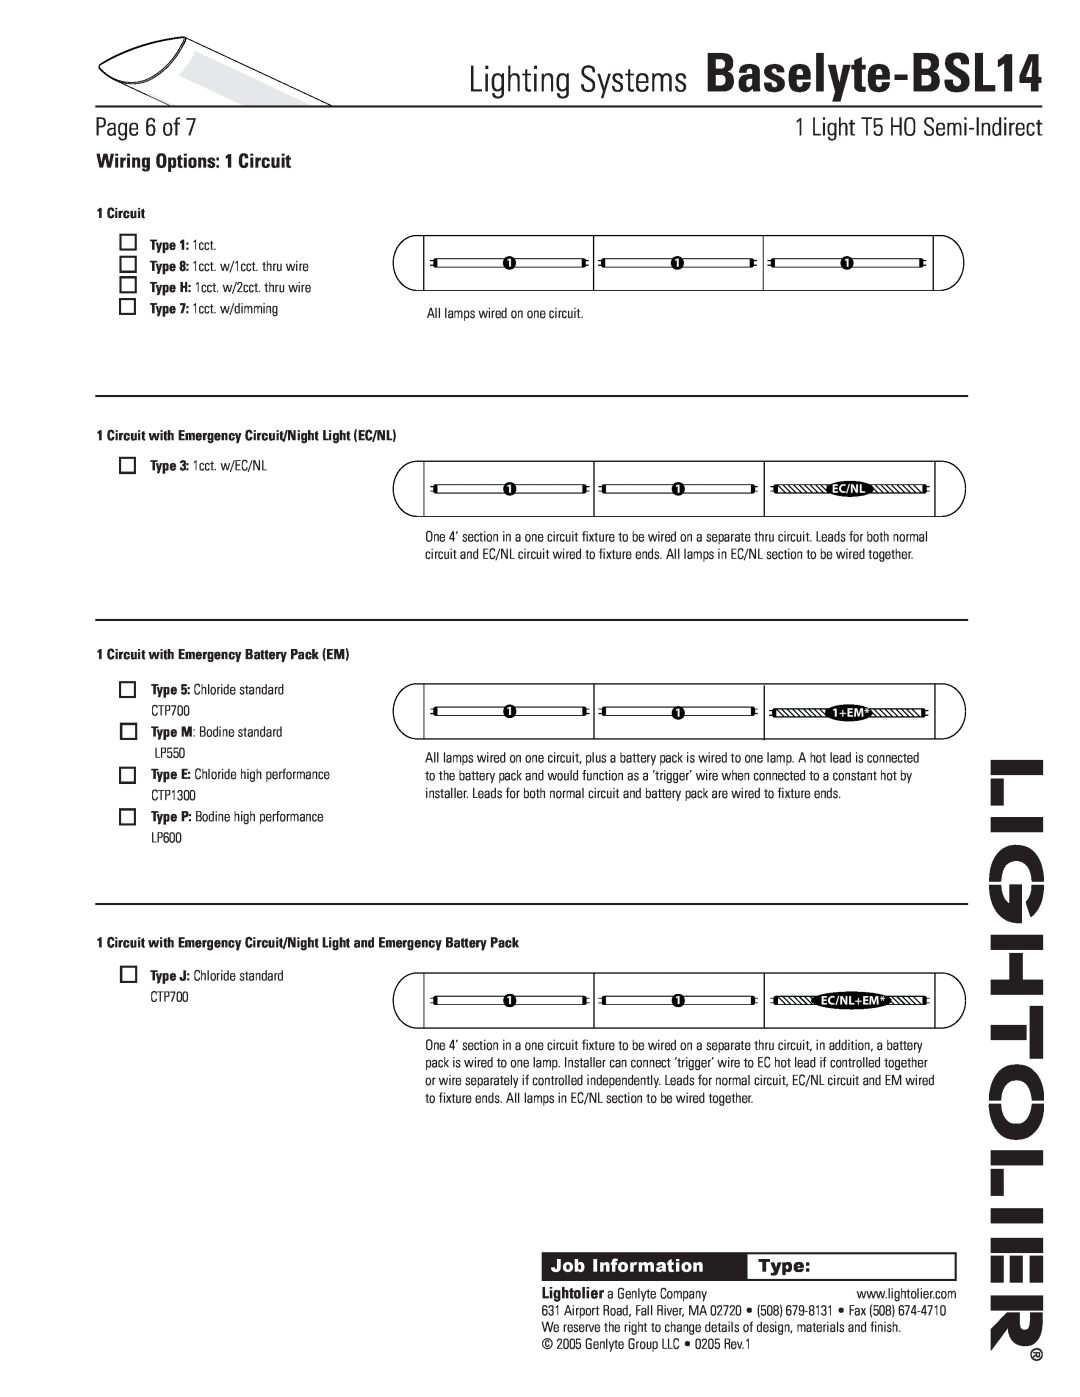 Lightolier Baselyte-BSL14 Wiring Options 1 Circuit, Circuit Type 1: 1cct, Circuit with Emergency Battery Pack EM, Page of 